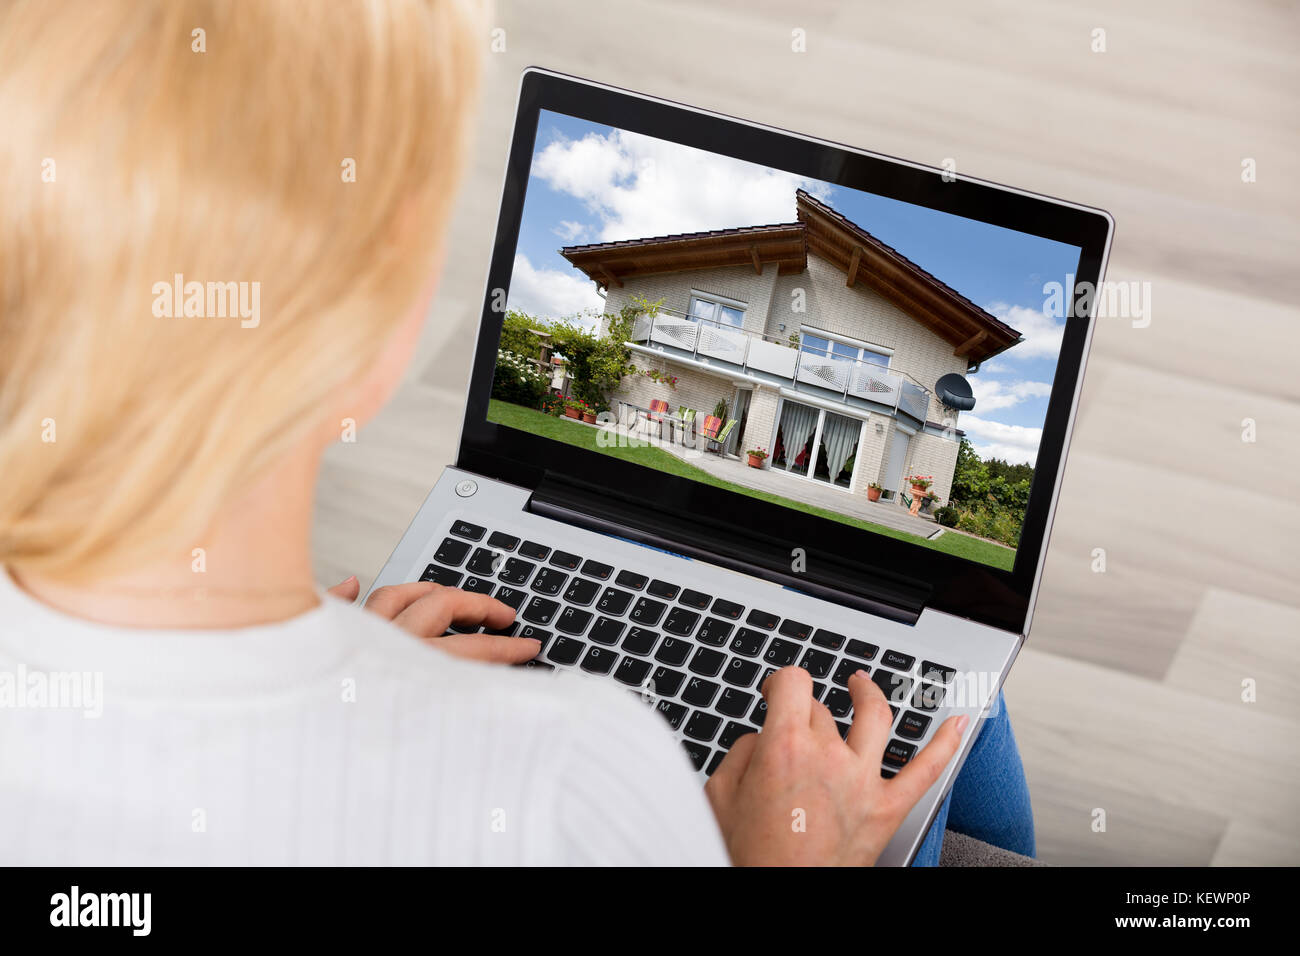 High Angle View Of A Woman Looking At House On Laptop Computer Screen Stock Photo